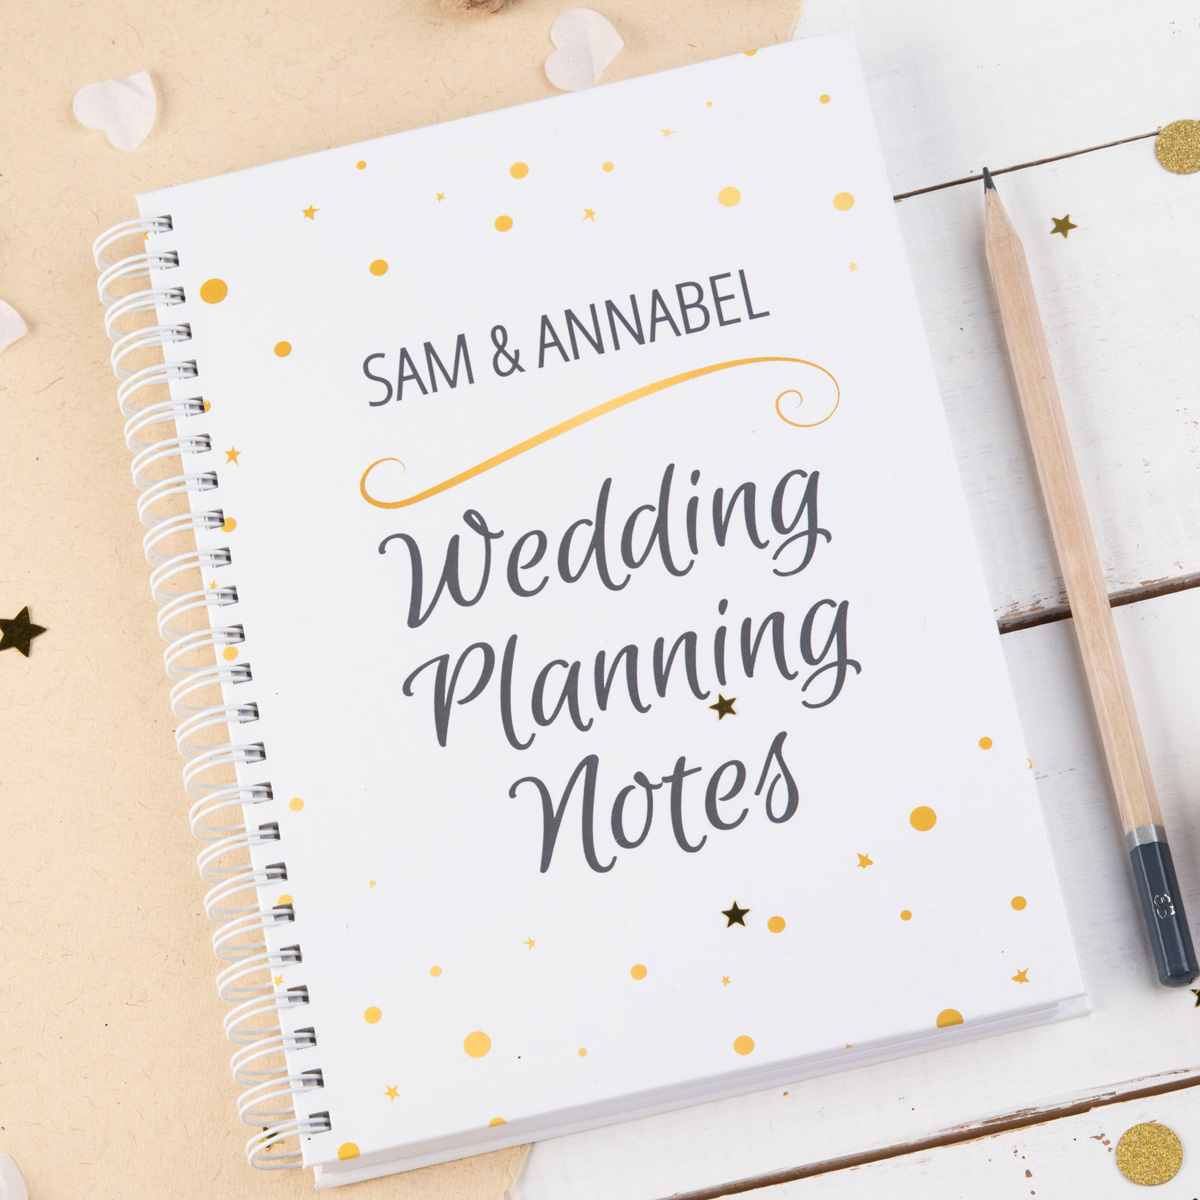 Personalised Notebook - Wedding Planning Notes